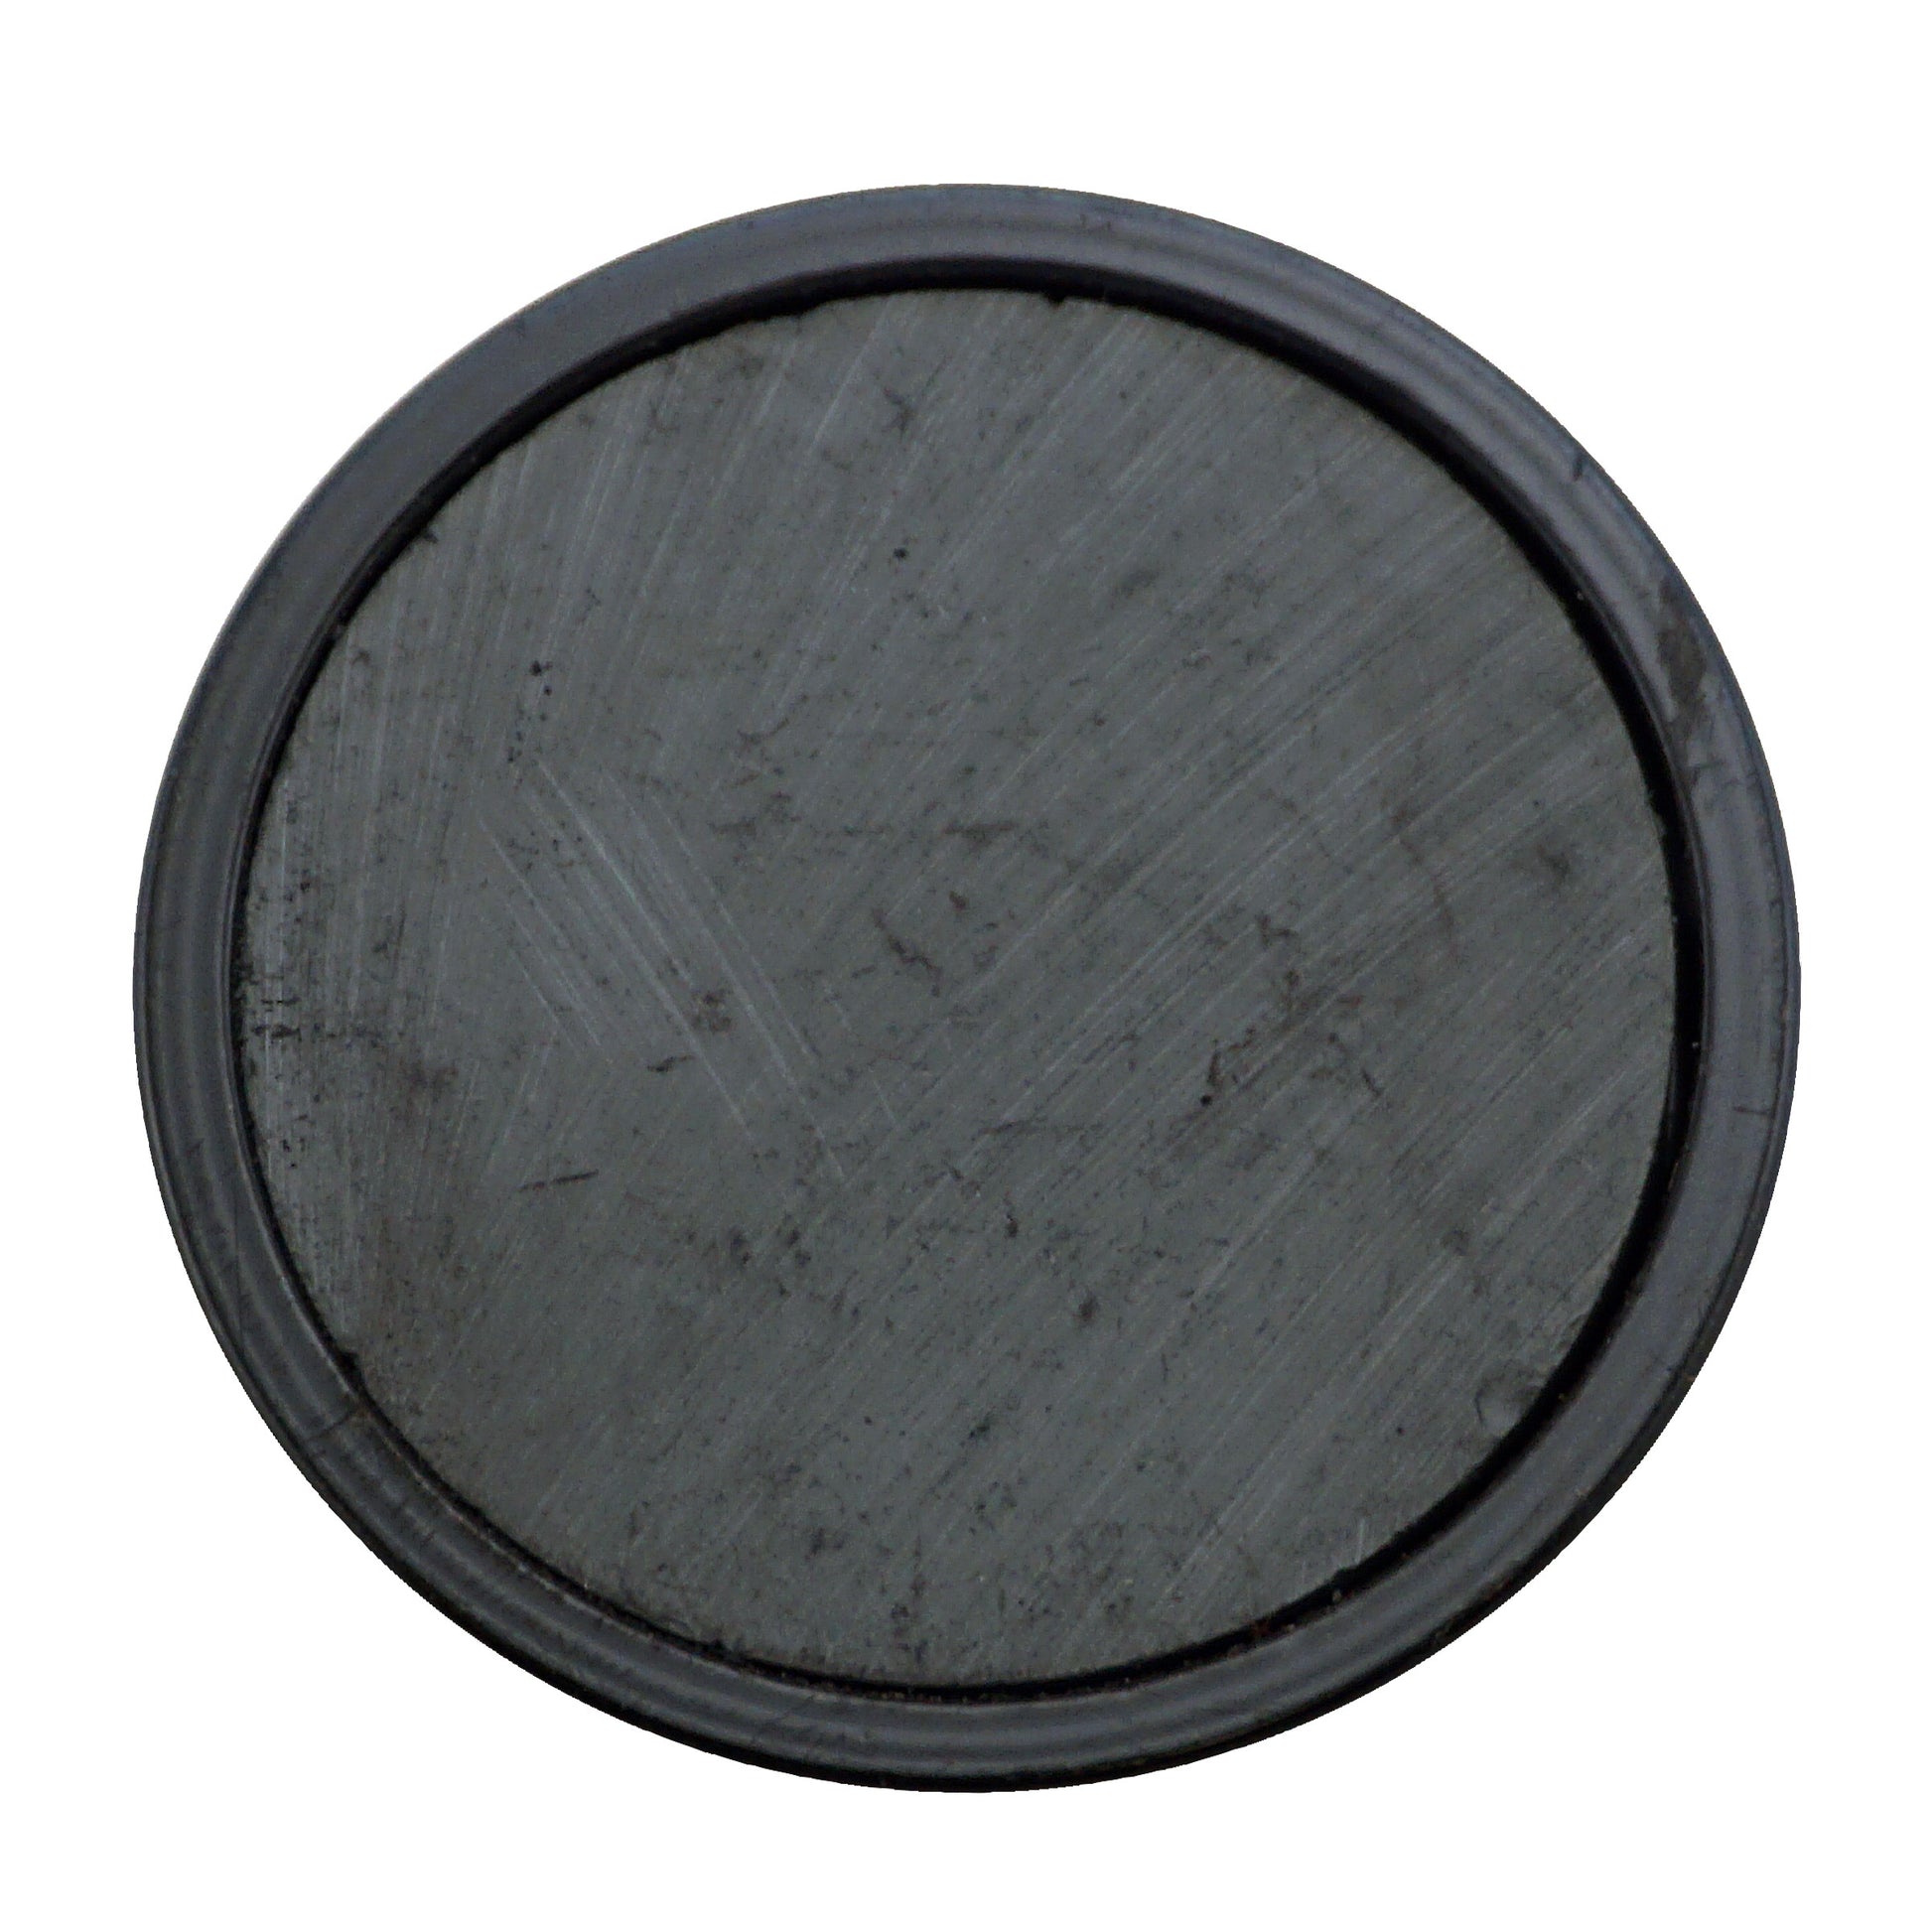 Load image into Gallery viewer, CACM189S01BPC Ceramic Round Base Magnet with Male Thread - Top View